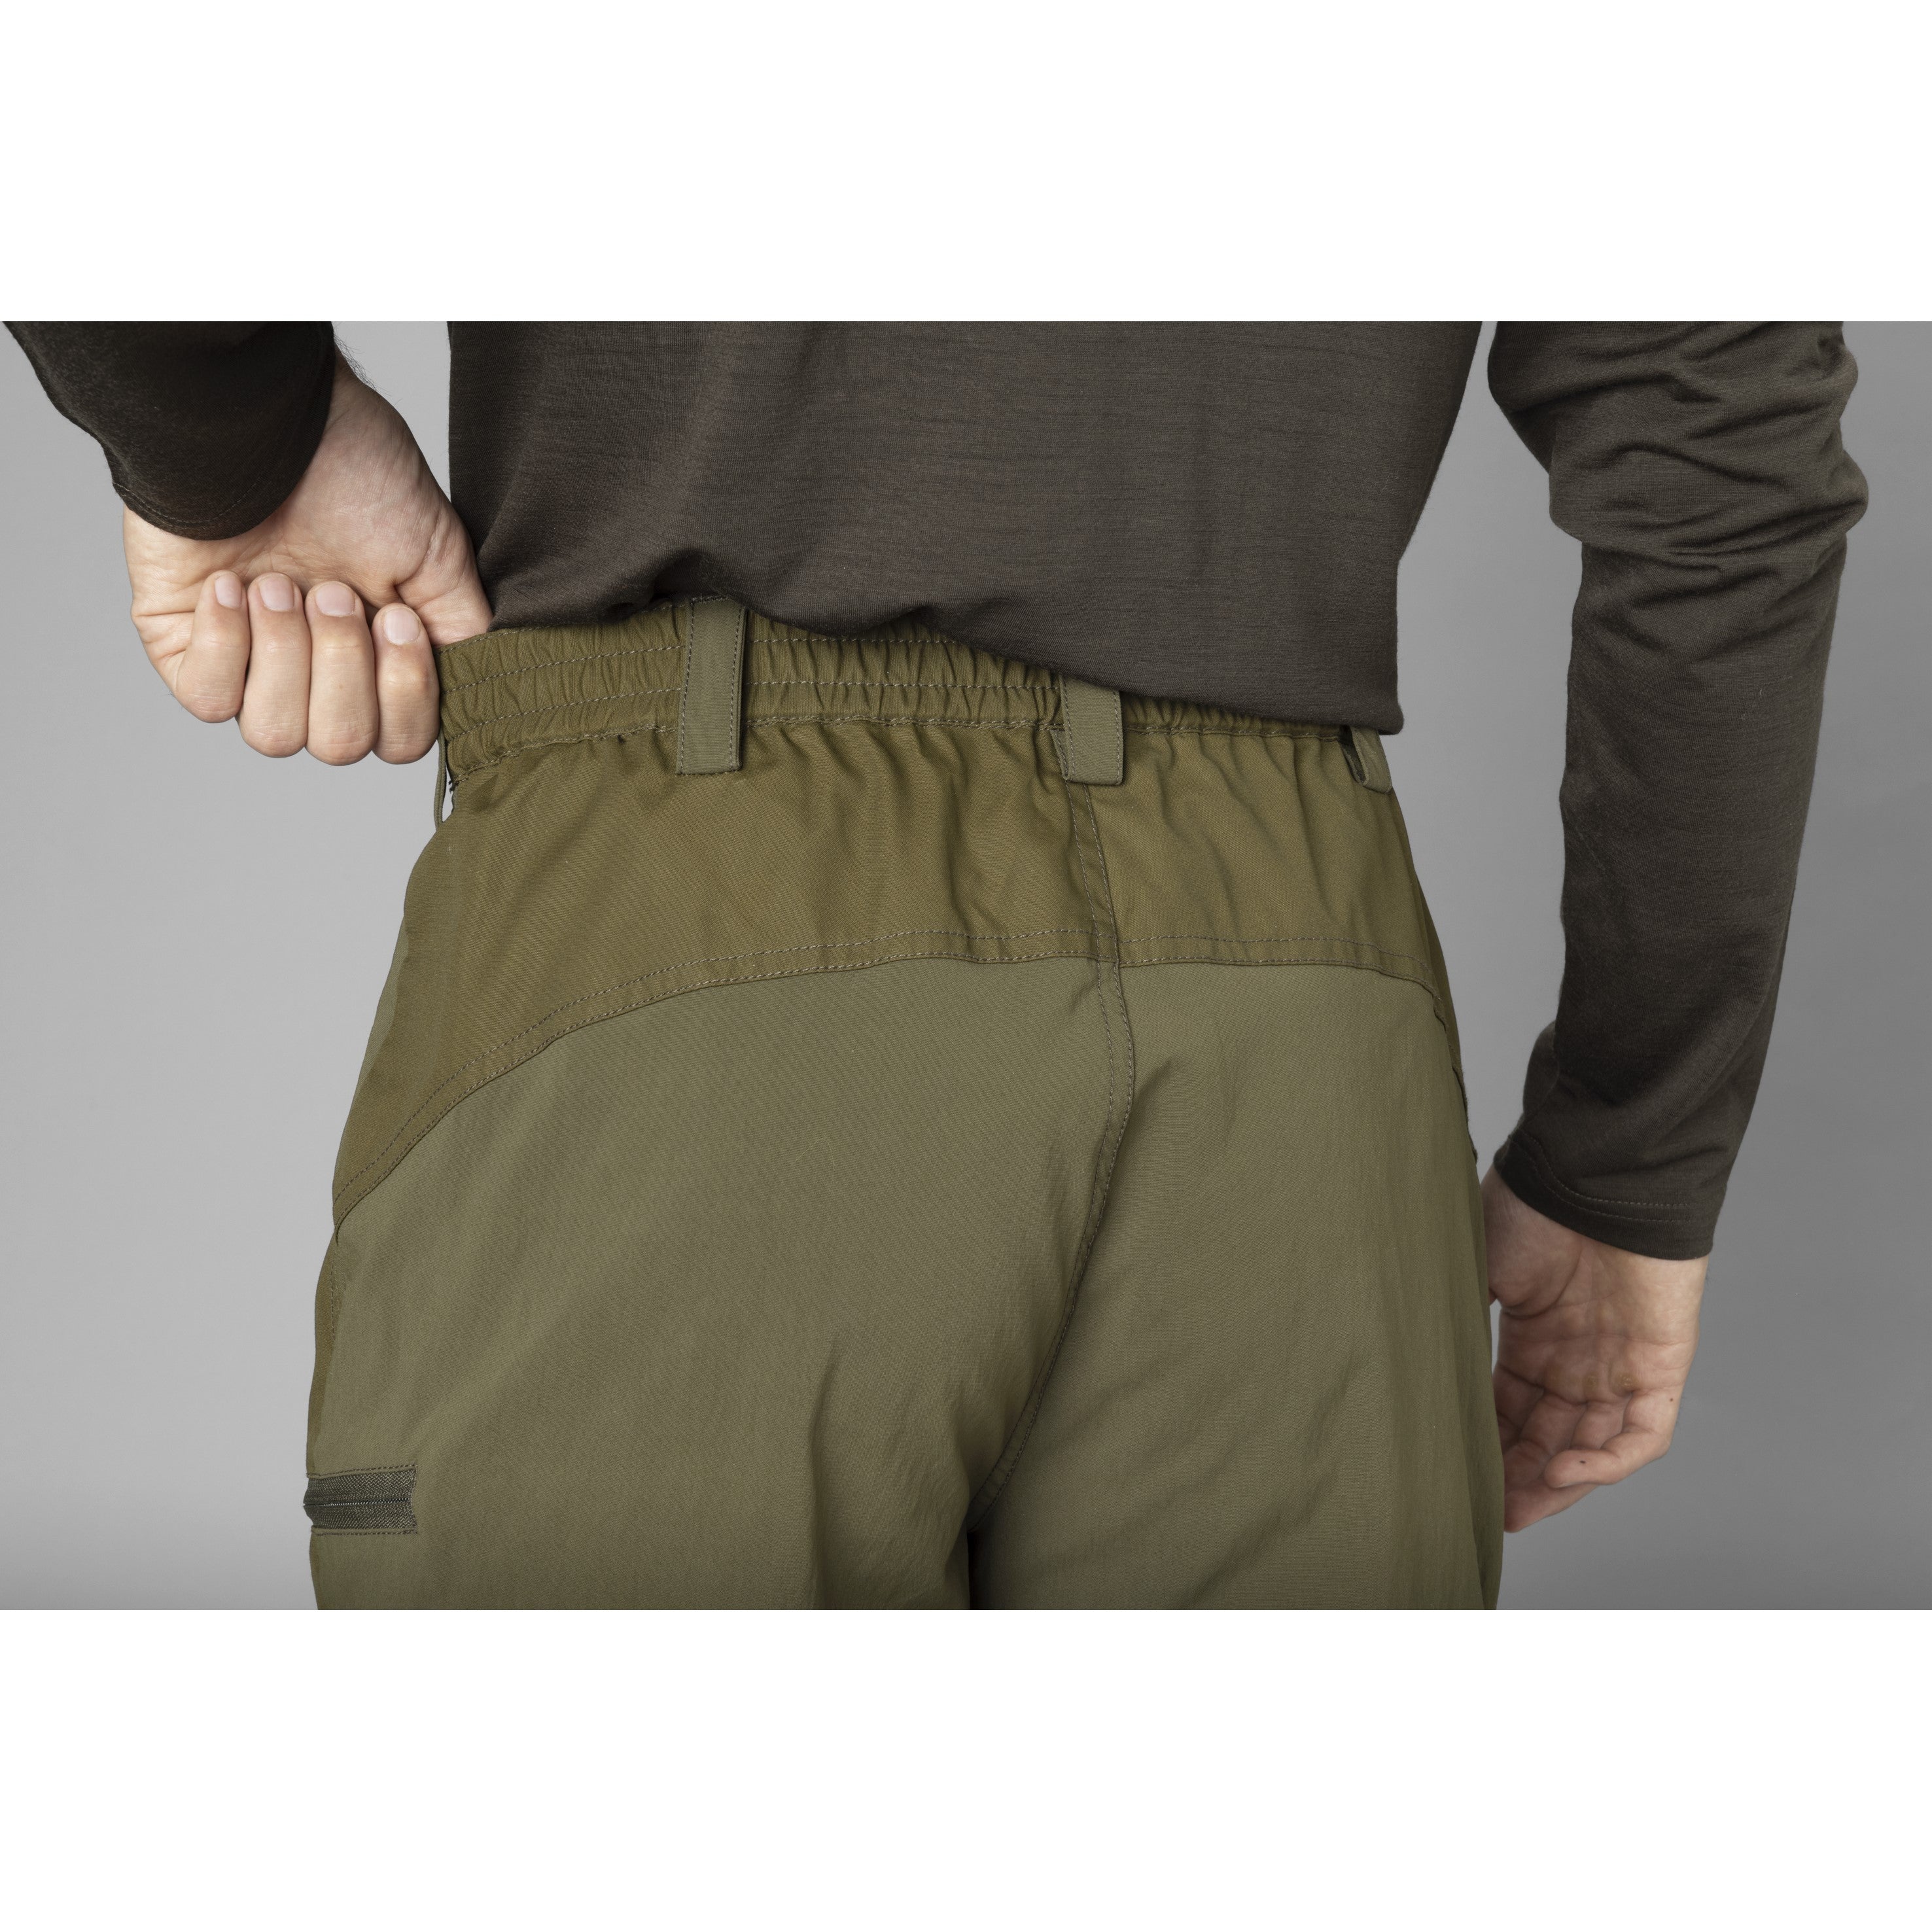 Harkila Fjell Mens Trousers - Light Willow Green/Willow Green